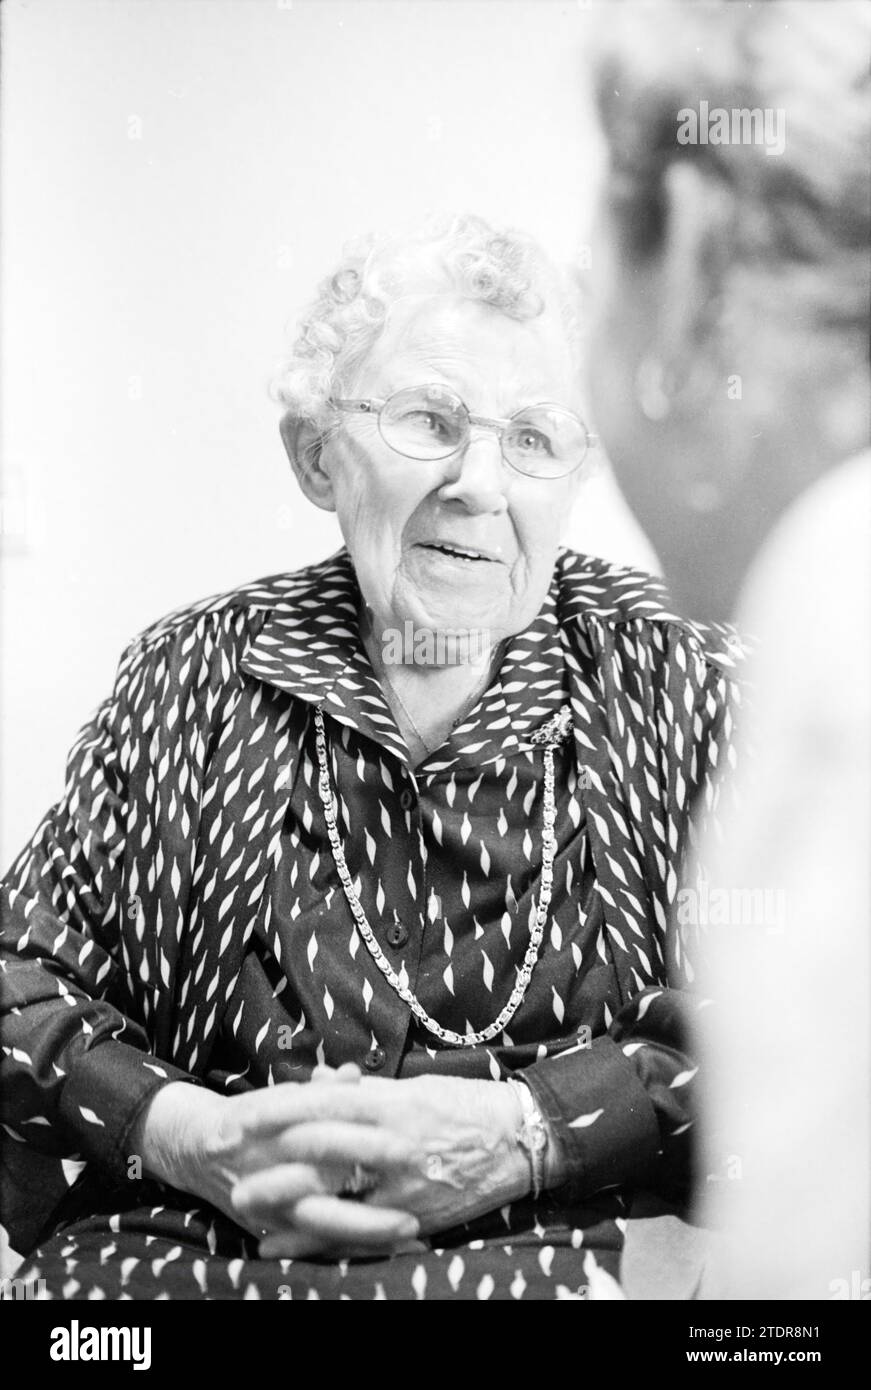 Mrs. van de Bosch 106 years, Centenarians, one hundred years, 13-07-1988, Whizgle News from the Past, Tailored for the Future. Explore historical narratives, Dutch The Netherlands agency image with a modern perspective, bridging the gap between yesterday's events and tomorrow's insights. A timeless journey shaping the stories that shape our future Stock Photo